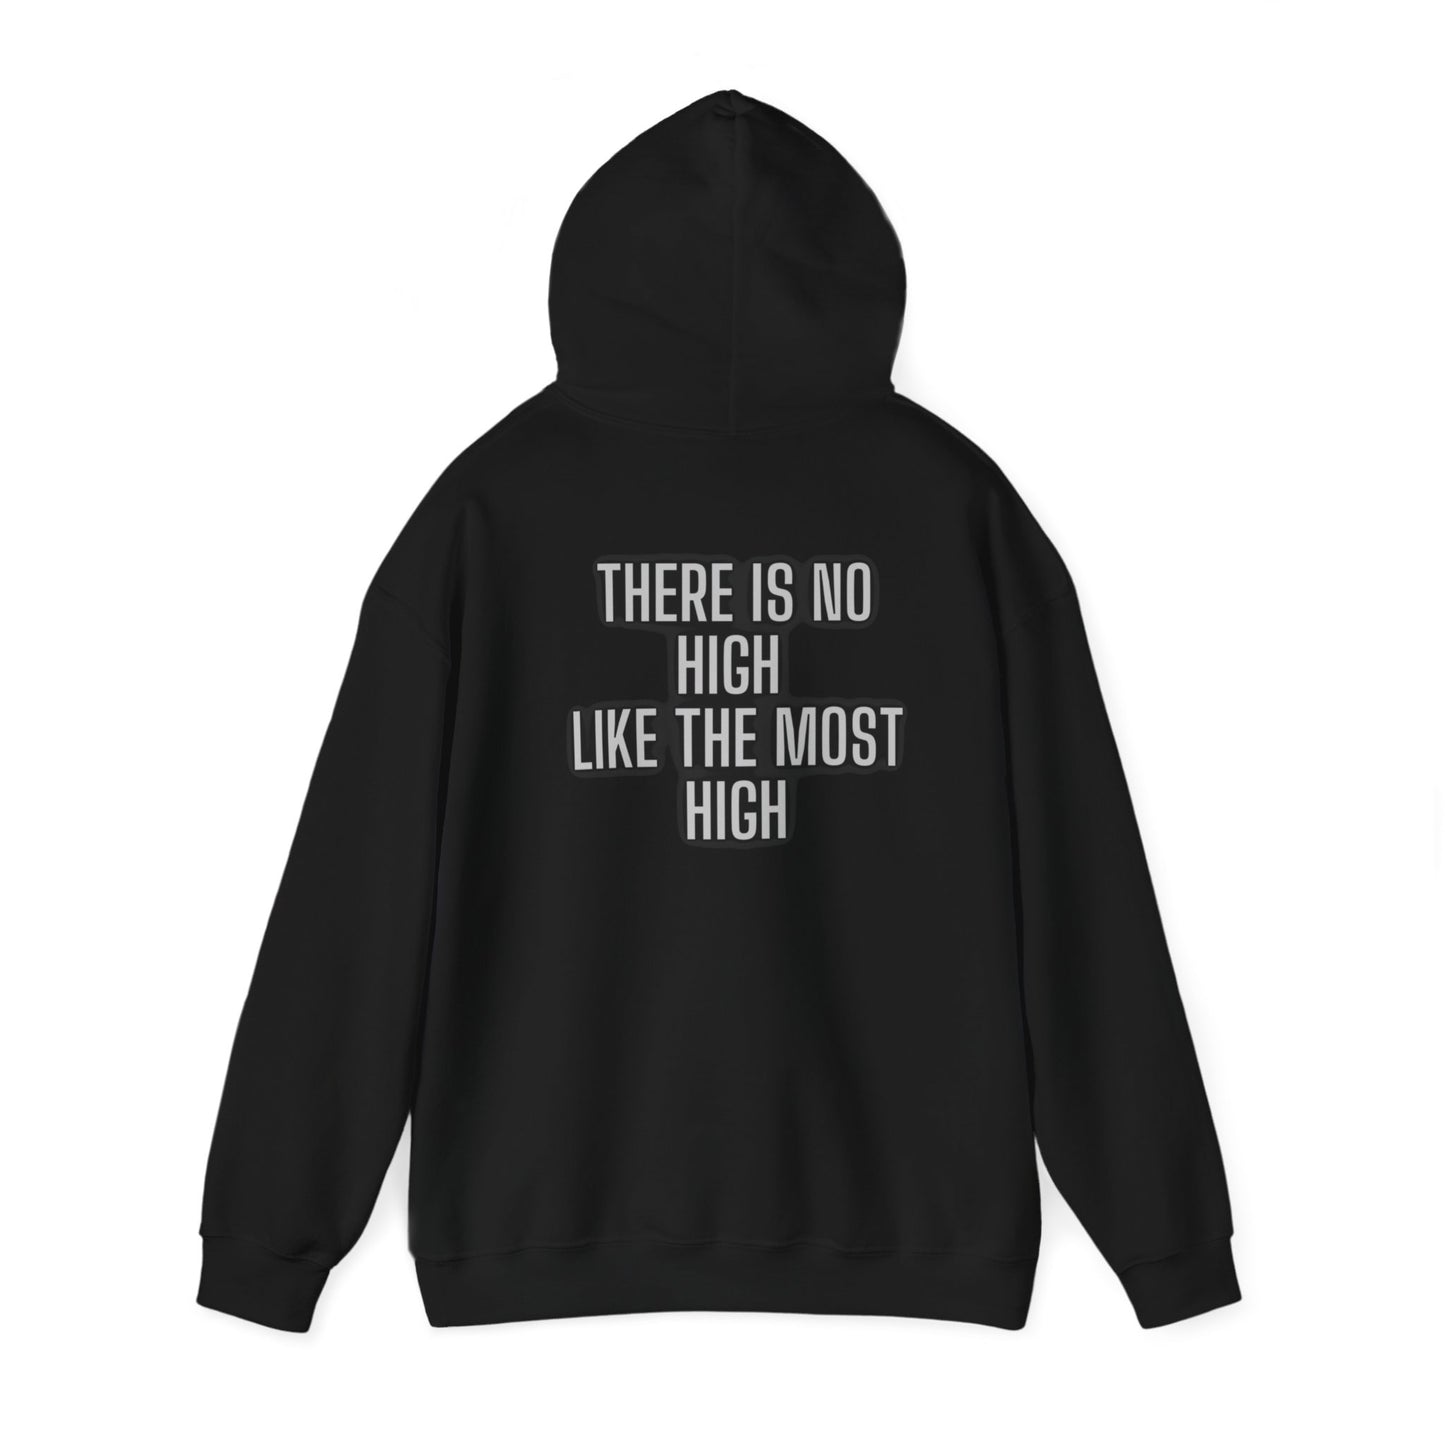 There is no higt like (Hooded Sweatshirt)